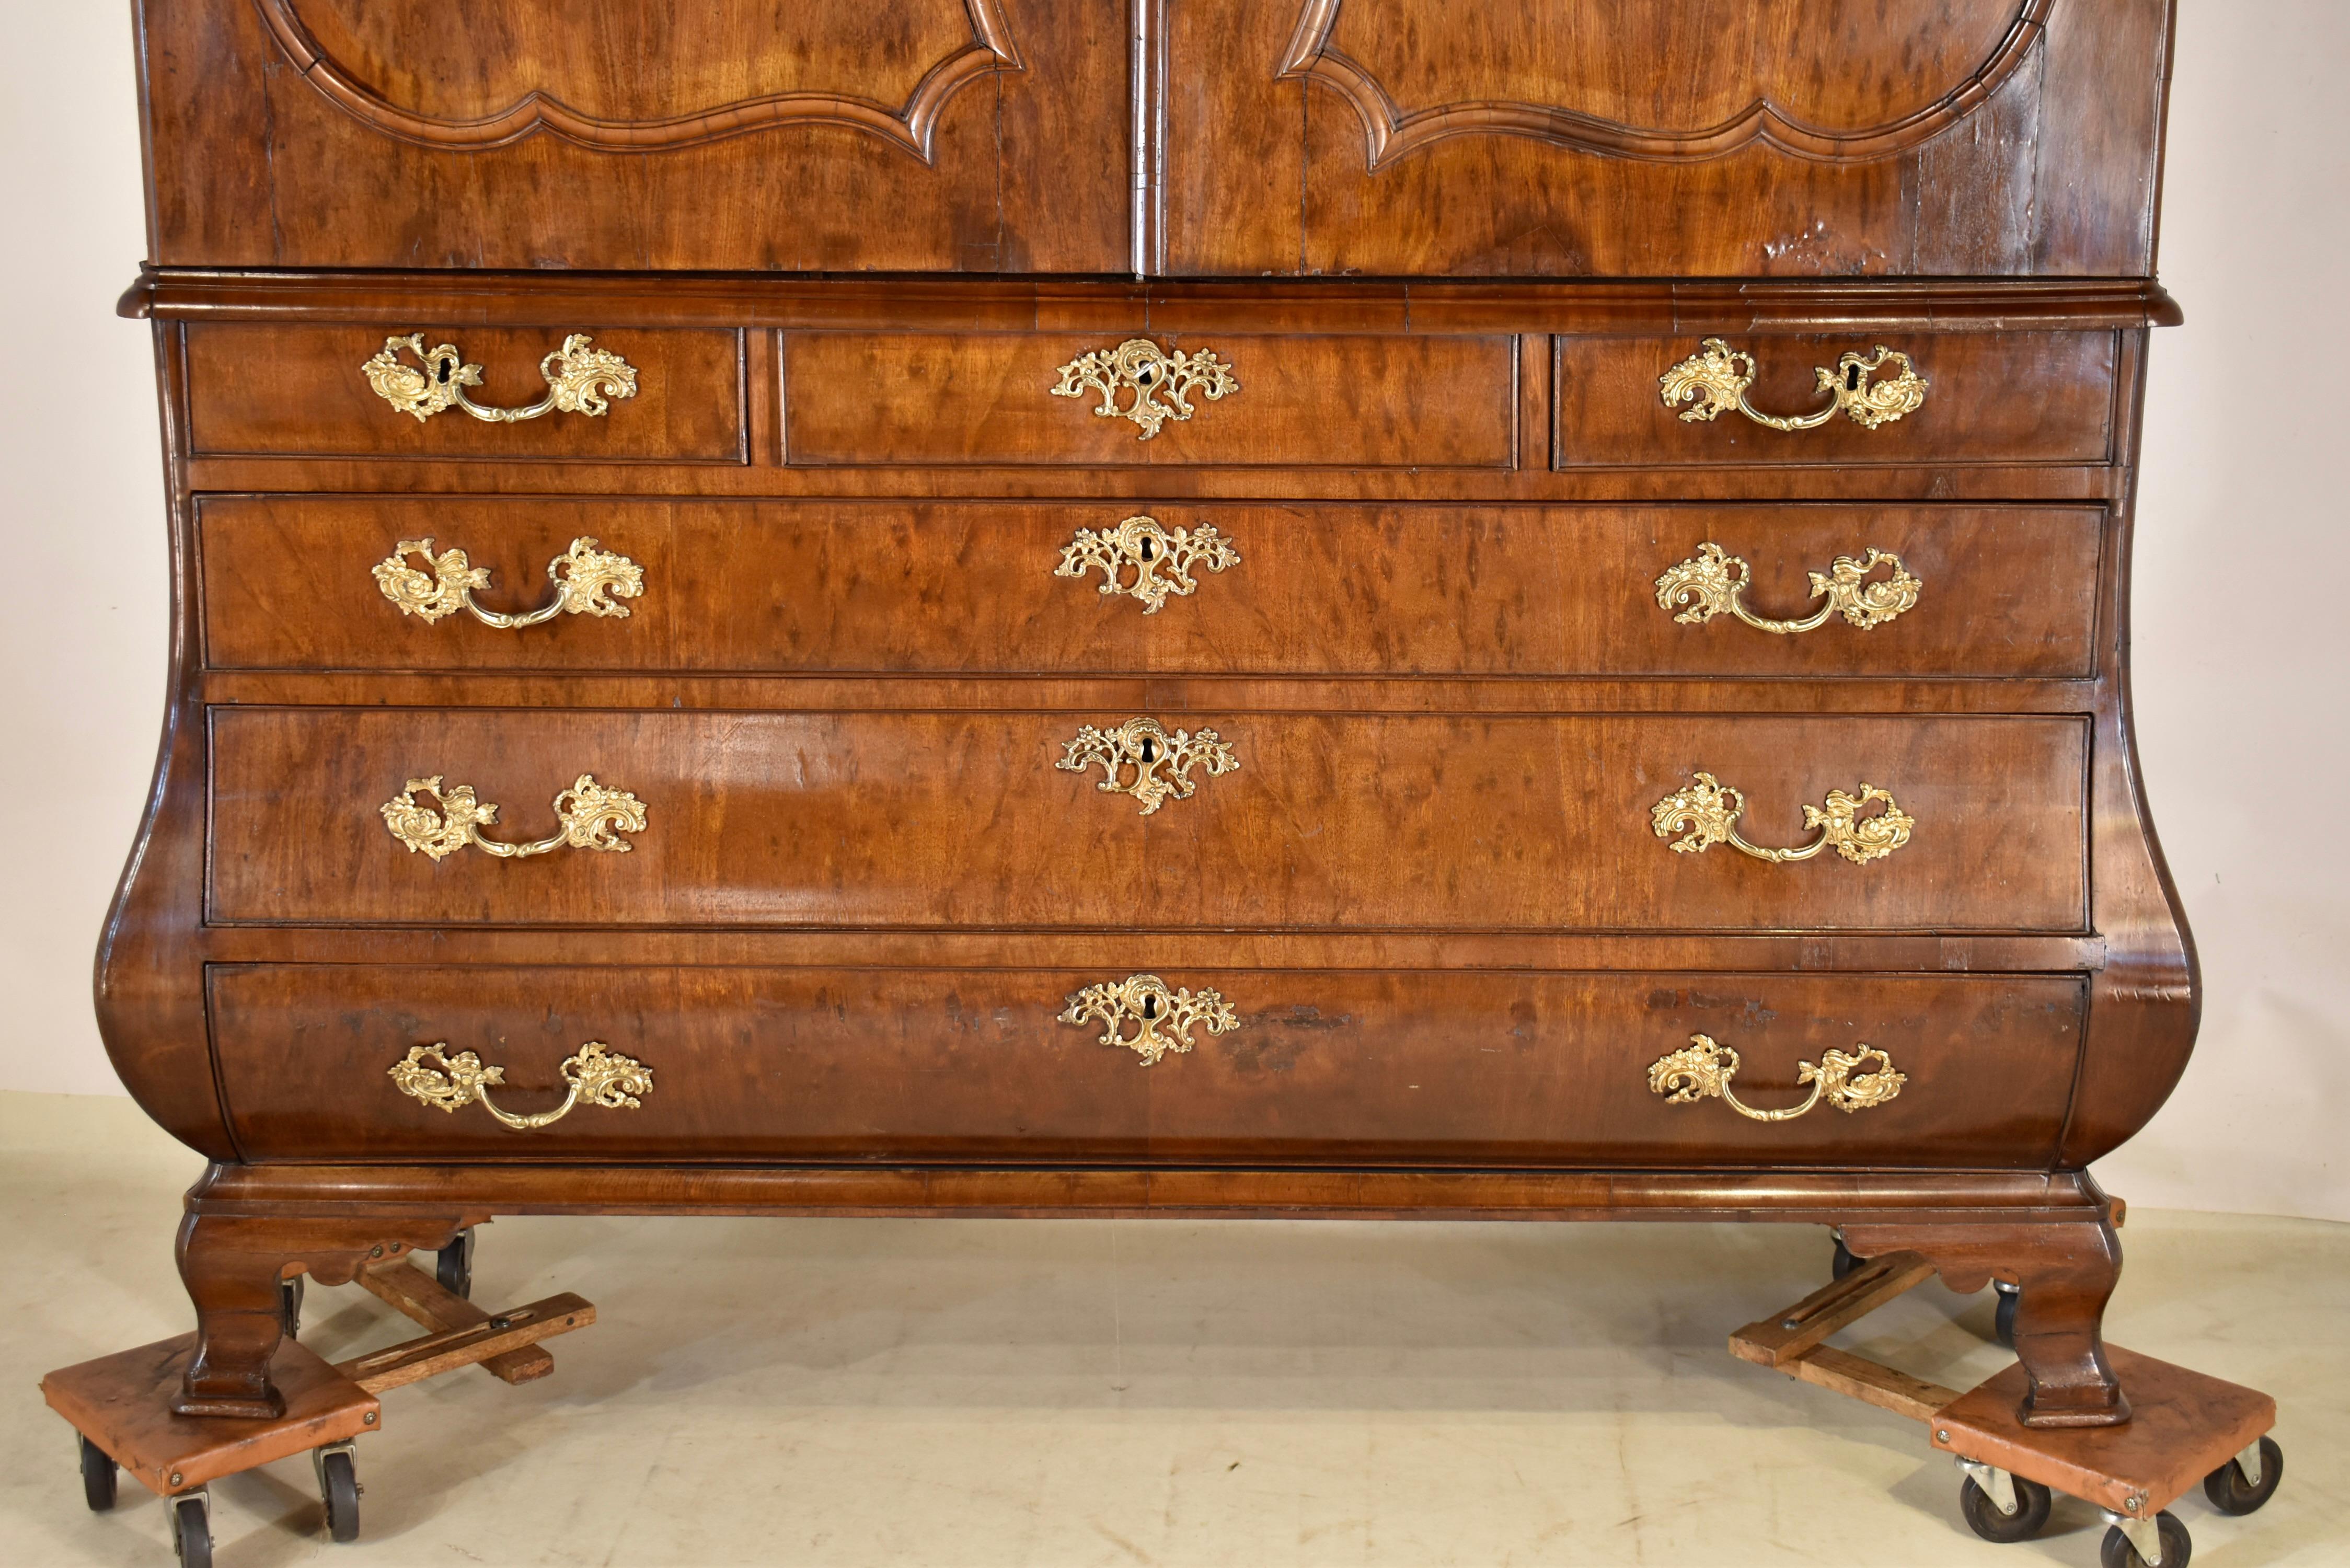 18th Century and Earlier 18th Century Dutch Plum Pudding Linen Press For Sale